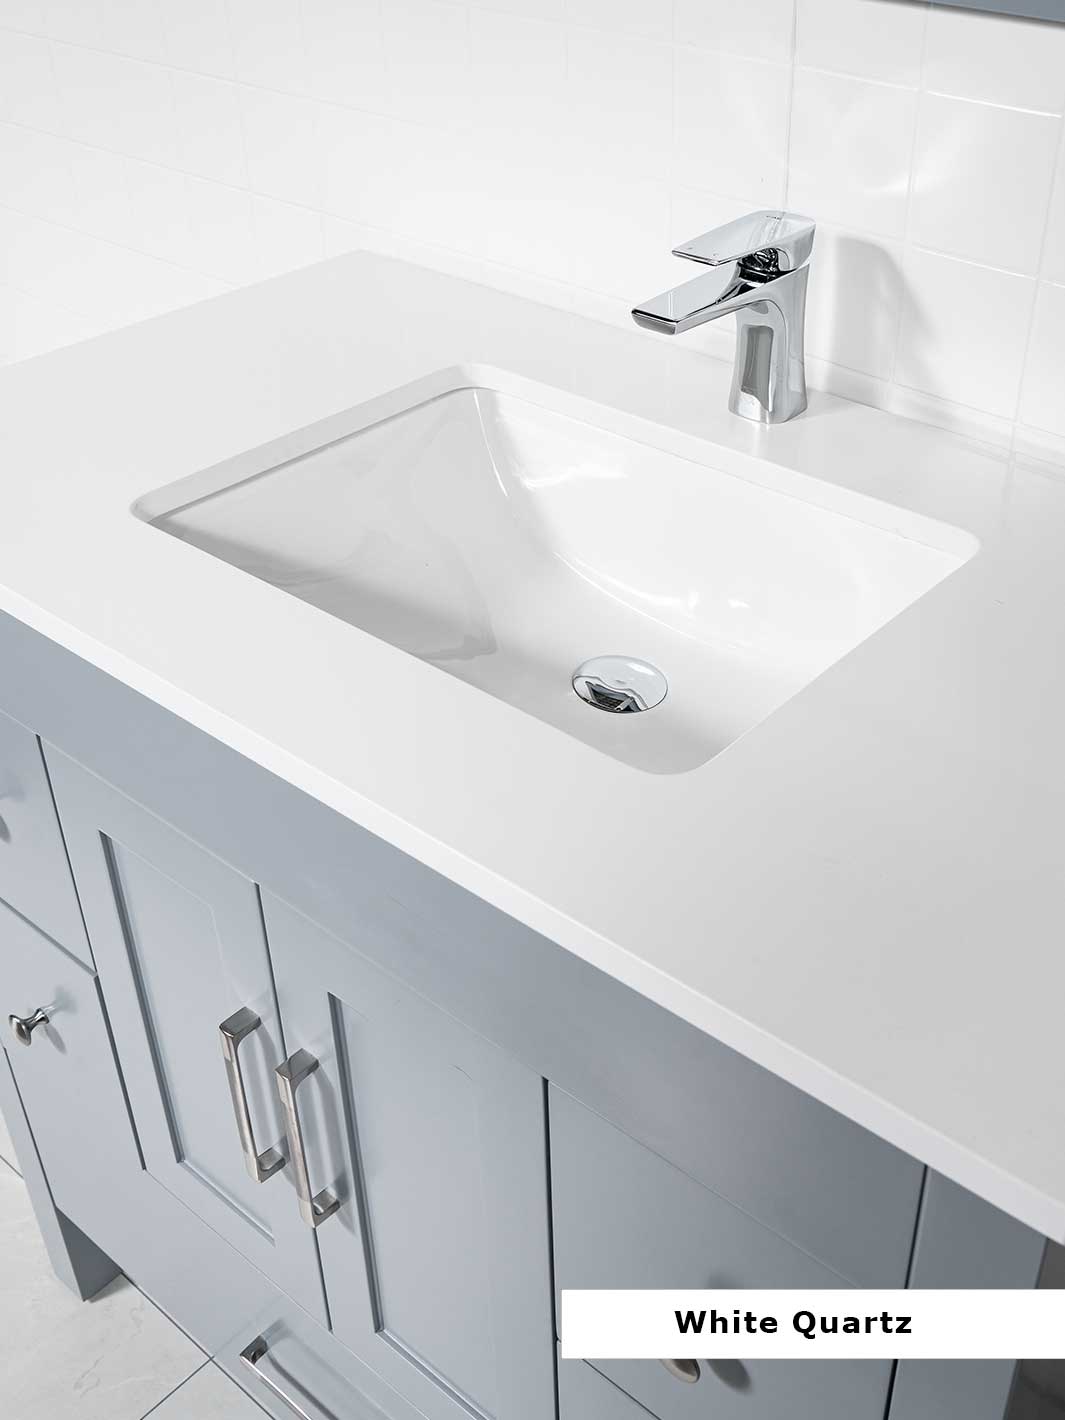 white quartz counter with sink and a chrome faucet